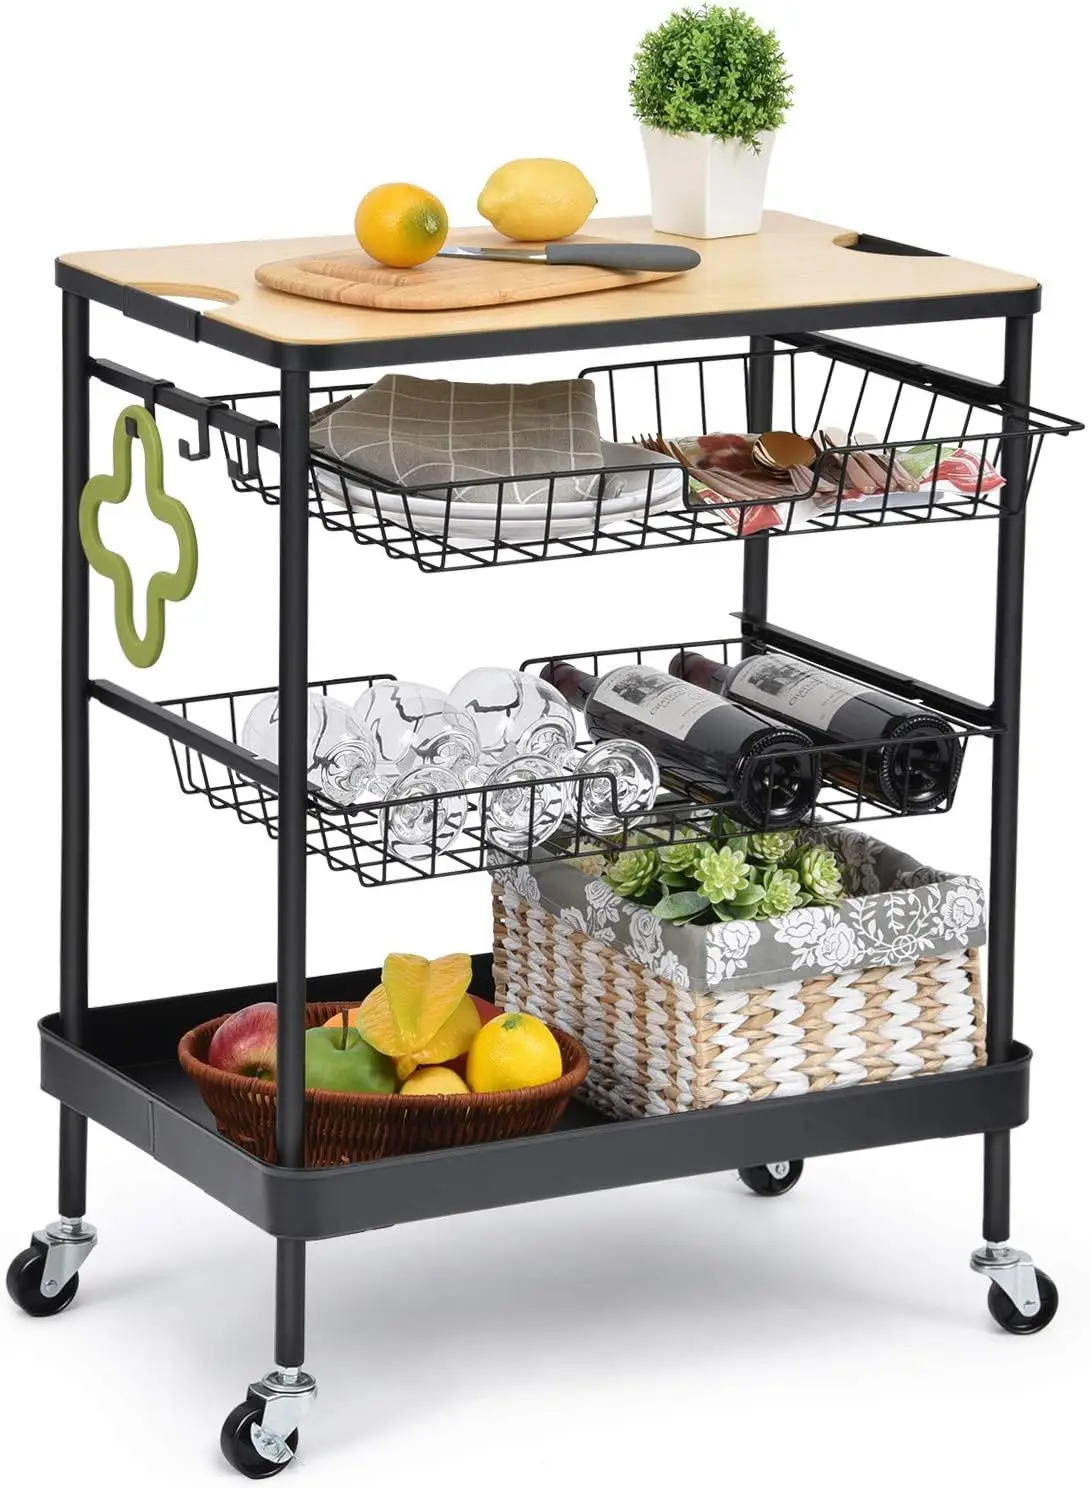 

Kitchen Island Serving Cart with Utility Wood Tabletop, 4-Tier Rolling Storage Cart with 2 Basket Drawers, Universal Lockable Ca